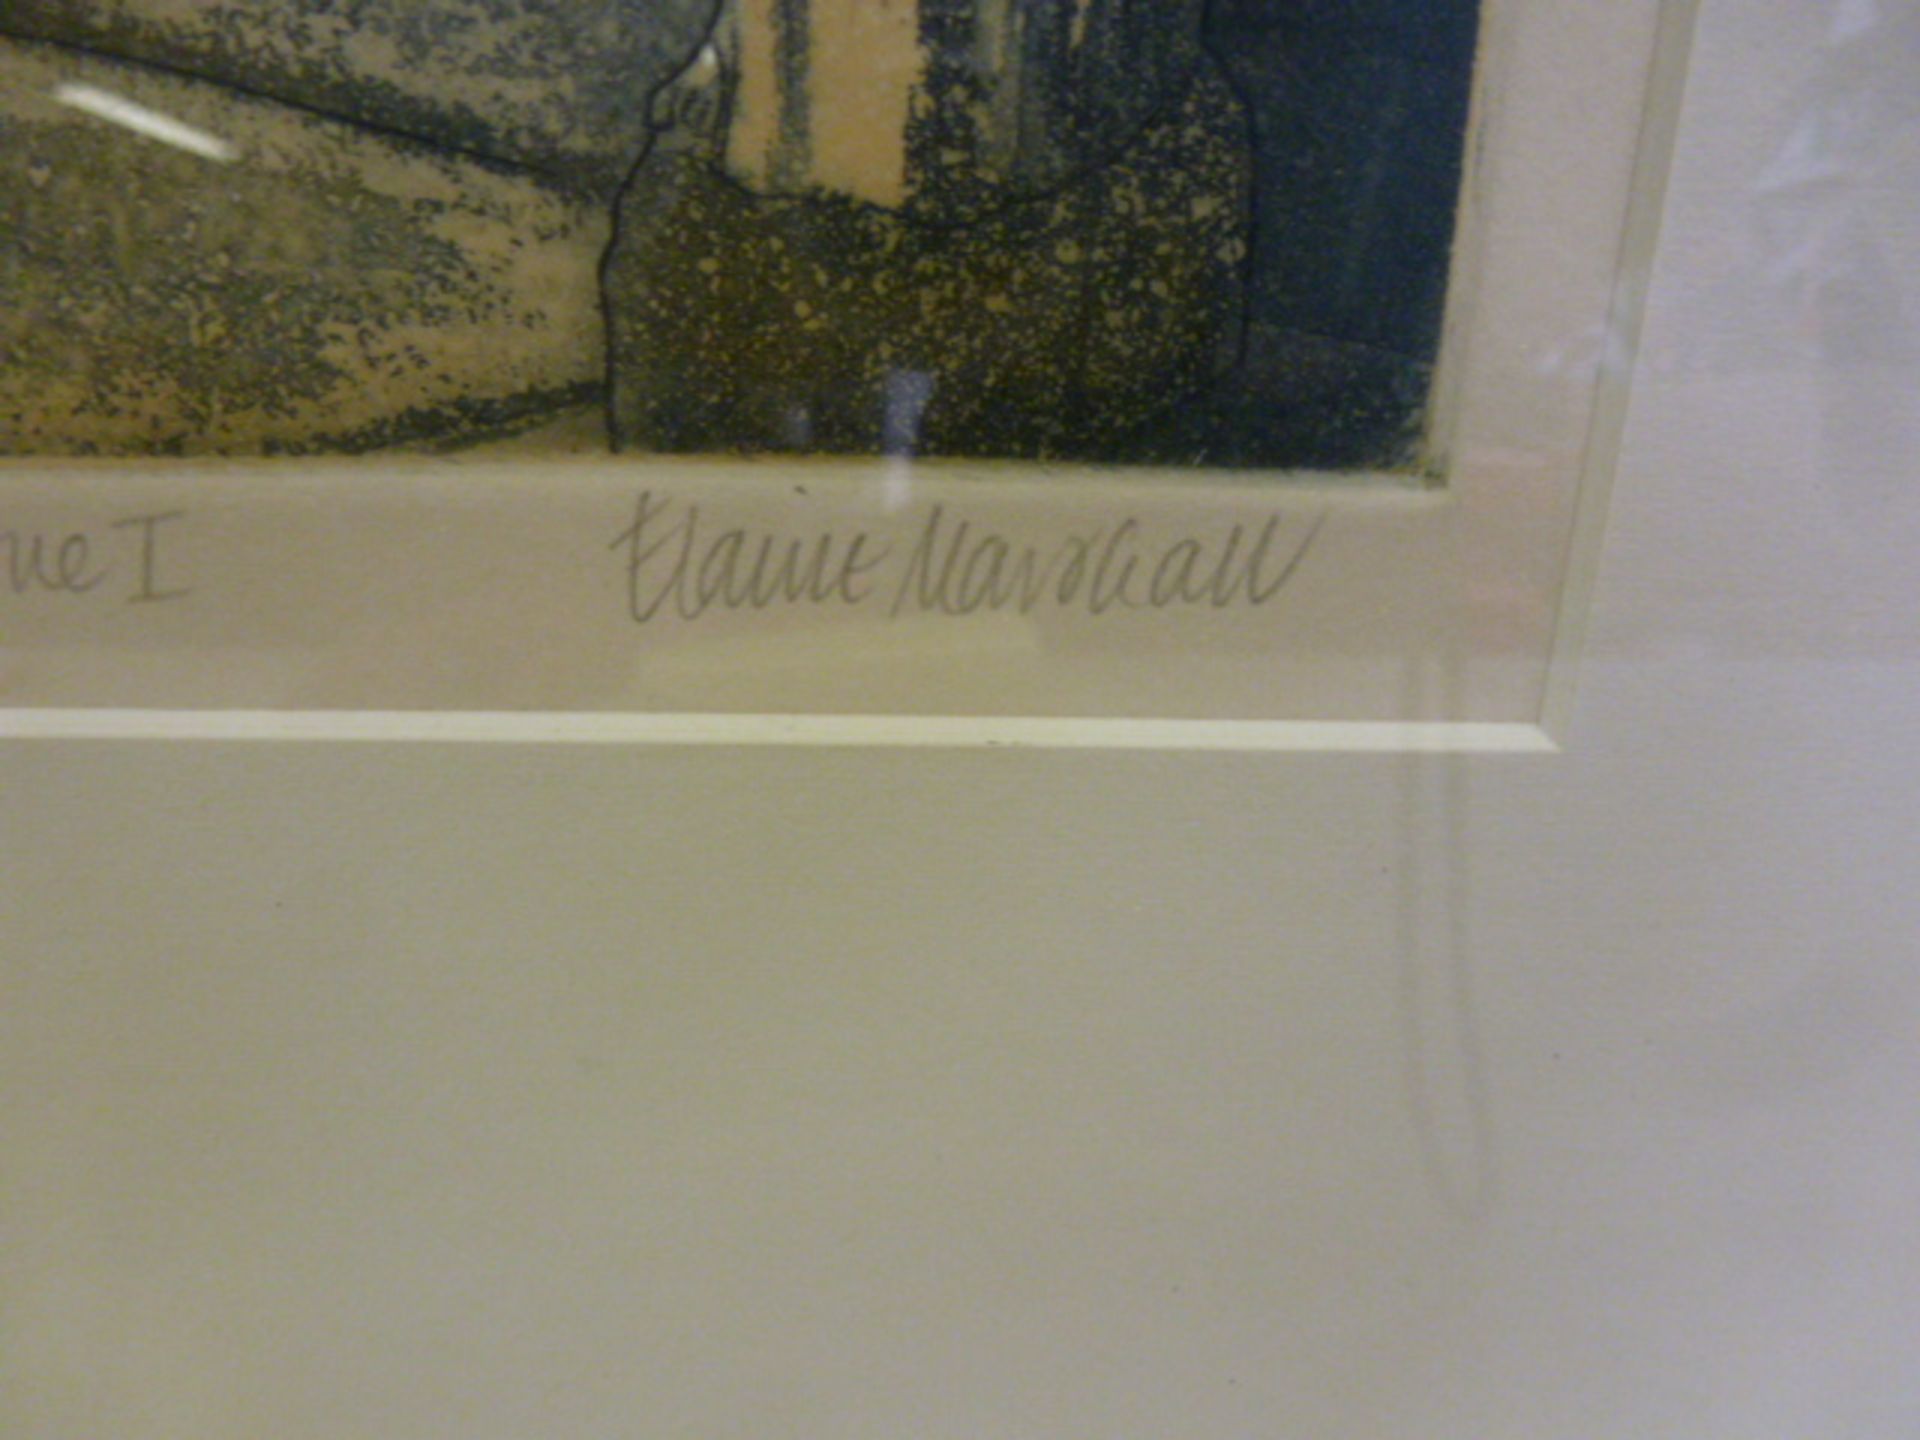 Framed & Glazed Limited Edition Print 11/100 Trinity Courtyard & Statue I by Elaine Mavogall - Image 3 of 4